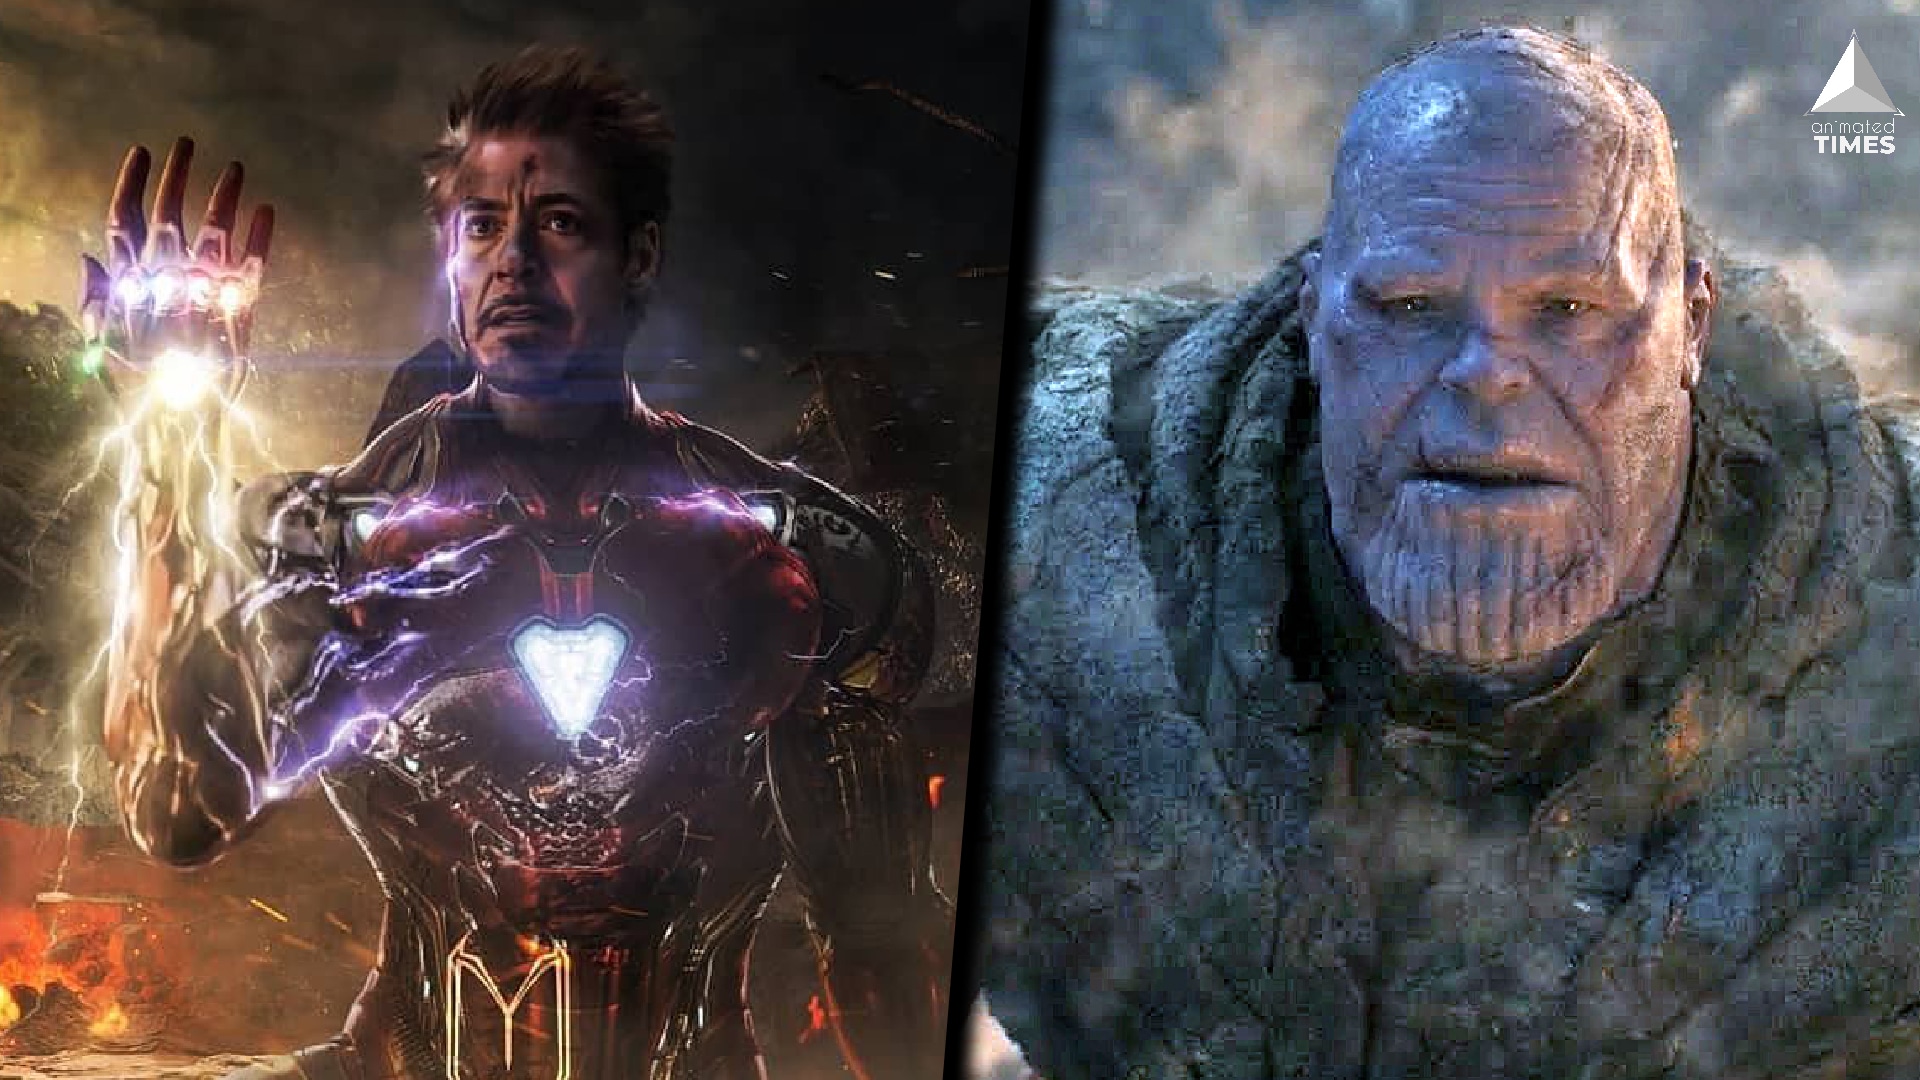 Avengers: Endgame Theory – Why Thanos Won 14,000,604 Times and Lost That One Time